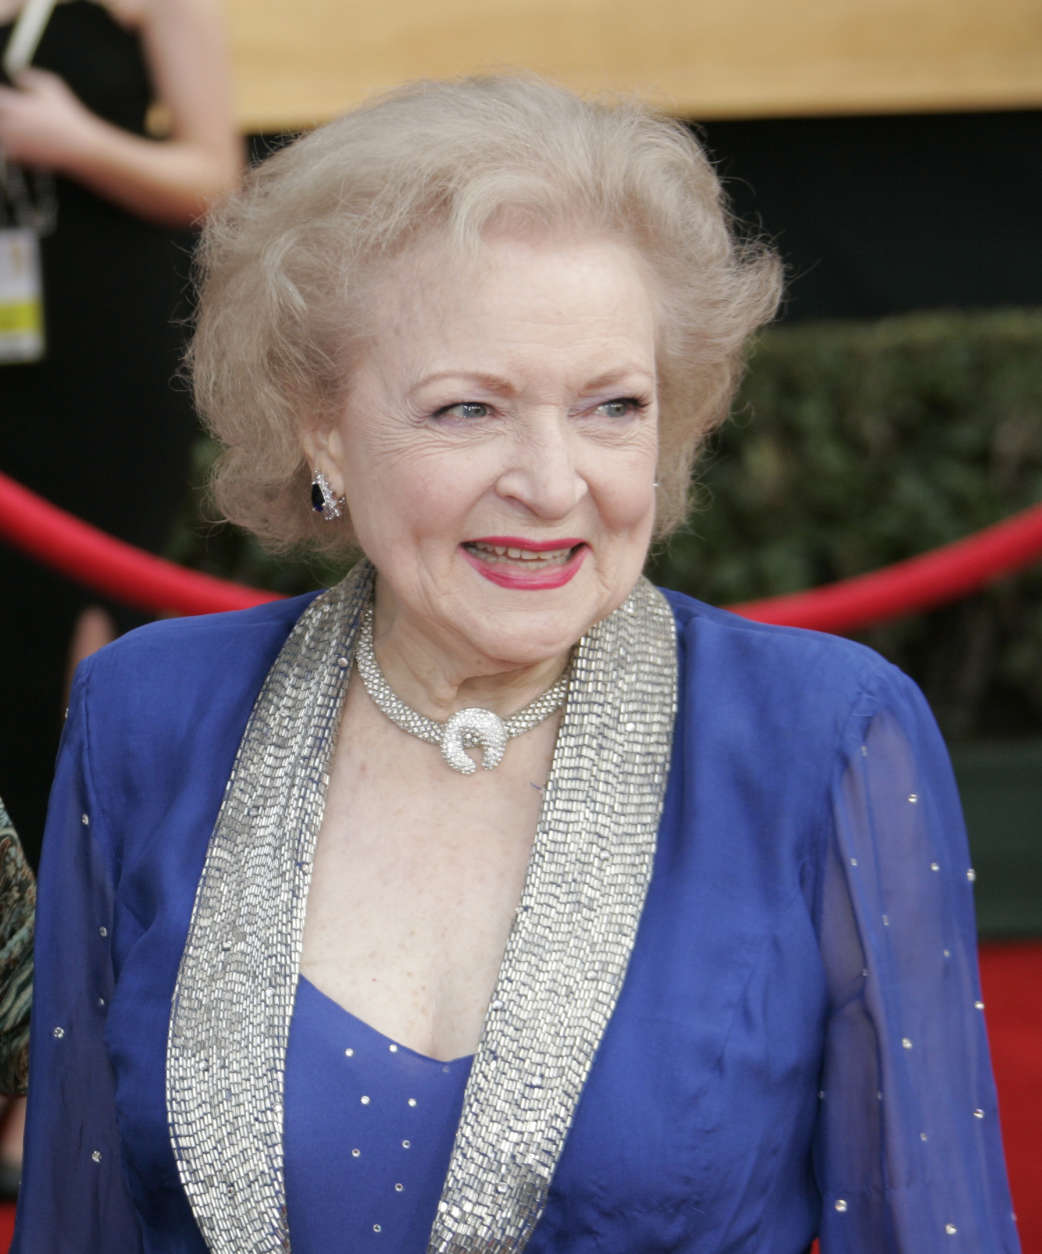 Betty White arrives at the 13th Annual Screen Actors Guild Awards on Sunday, Jan. 28, 2007, in Los Angeles. (AP Photo/Reed Saxon)